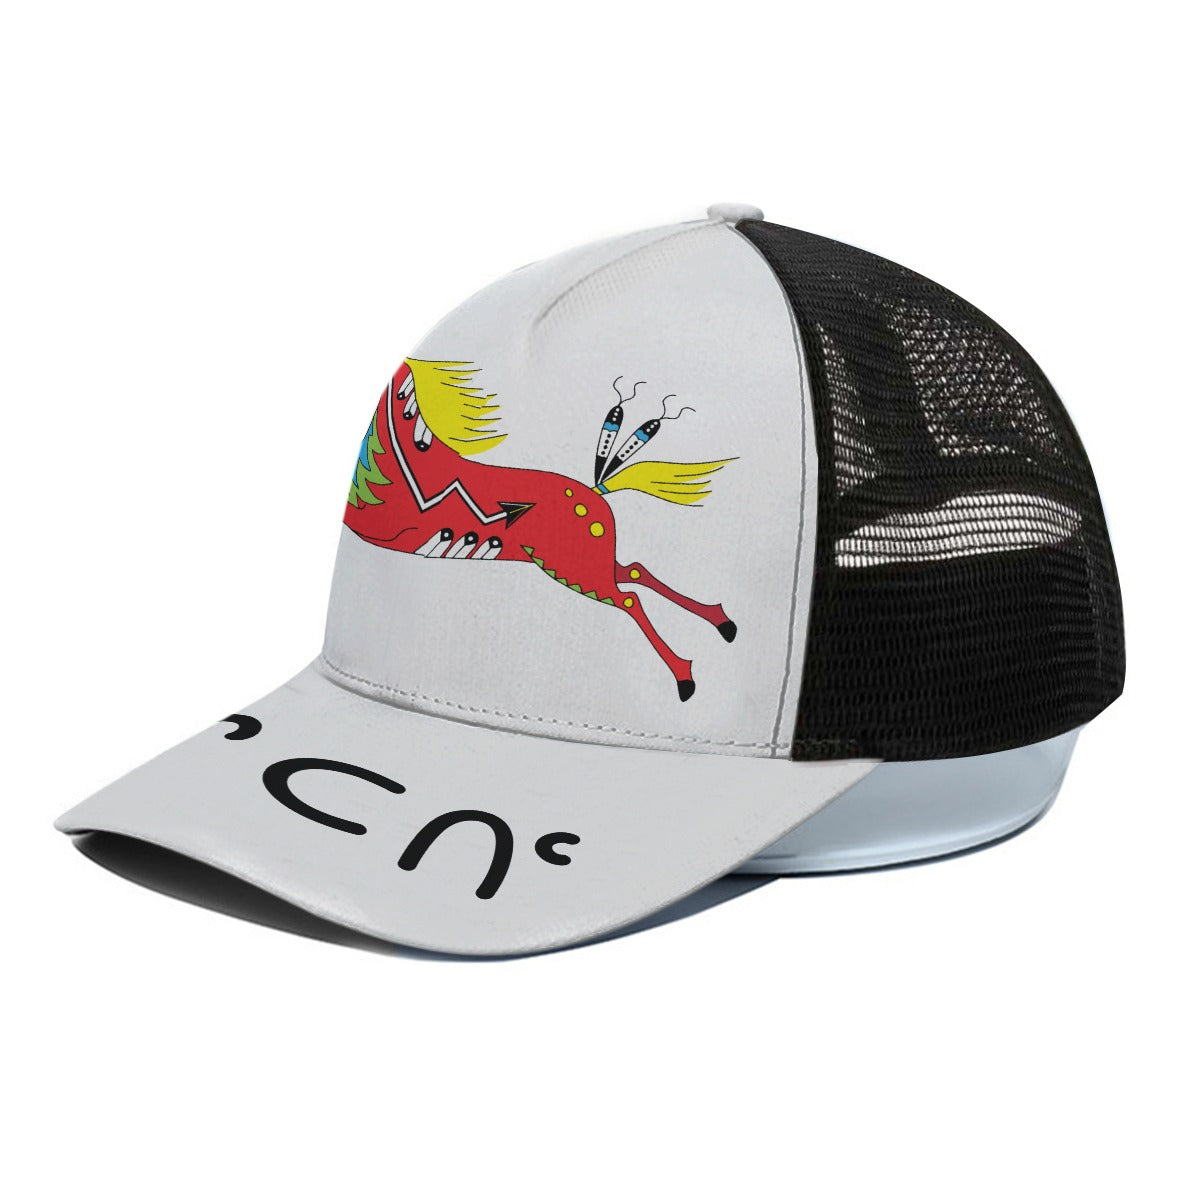 Leaping Horse Snapback Hat